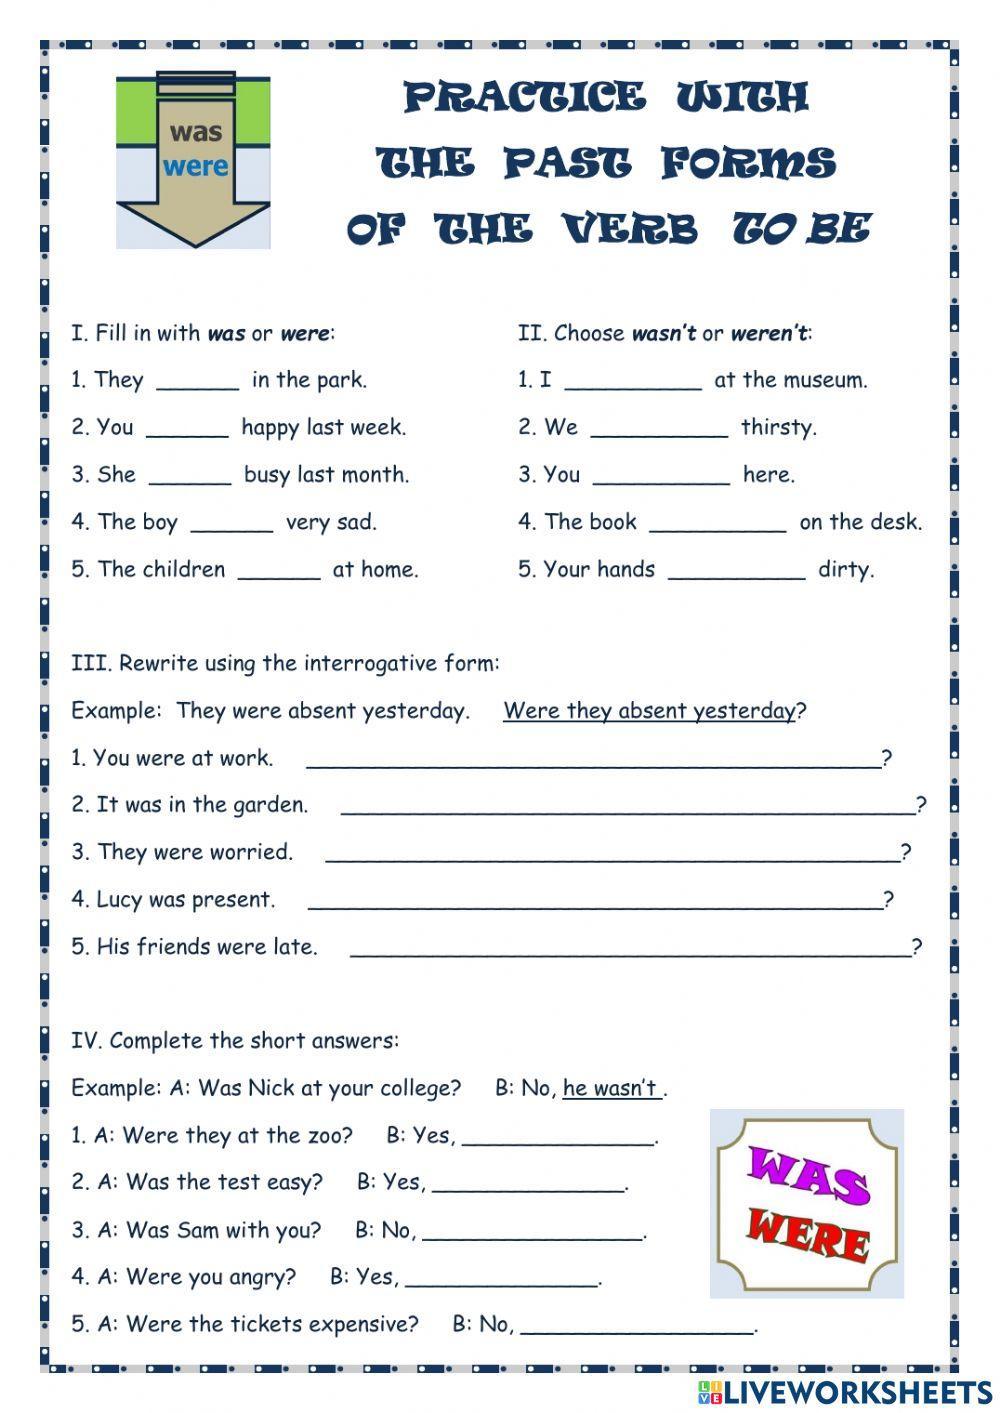 Practice with the past forms of the verb to be worksheet | Live Worksheets